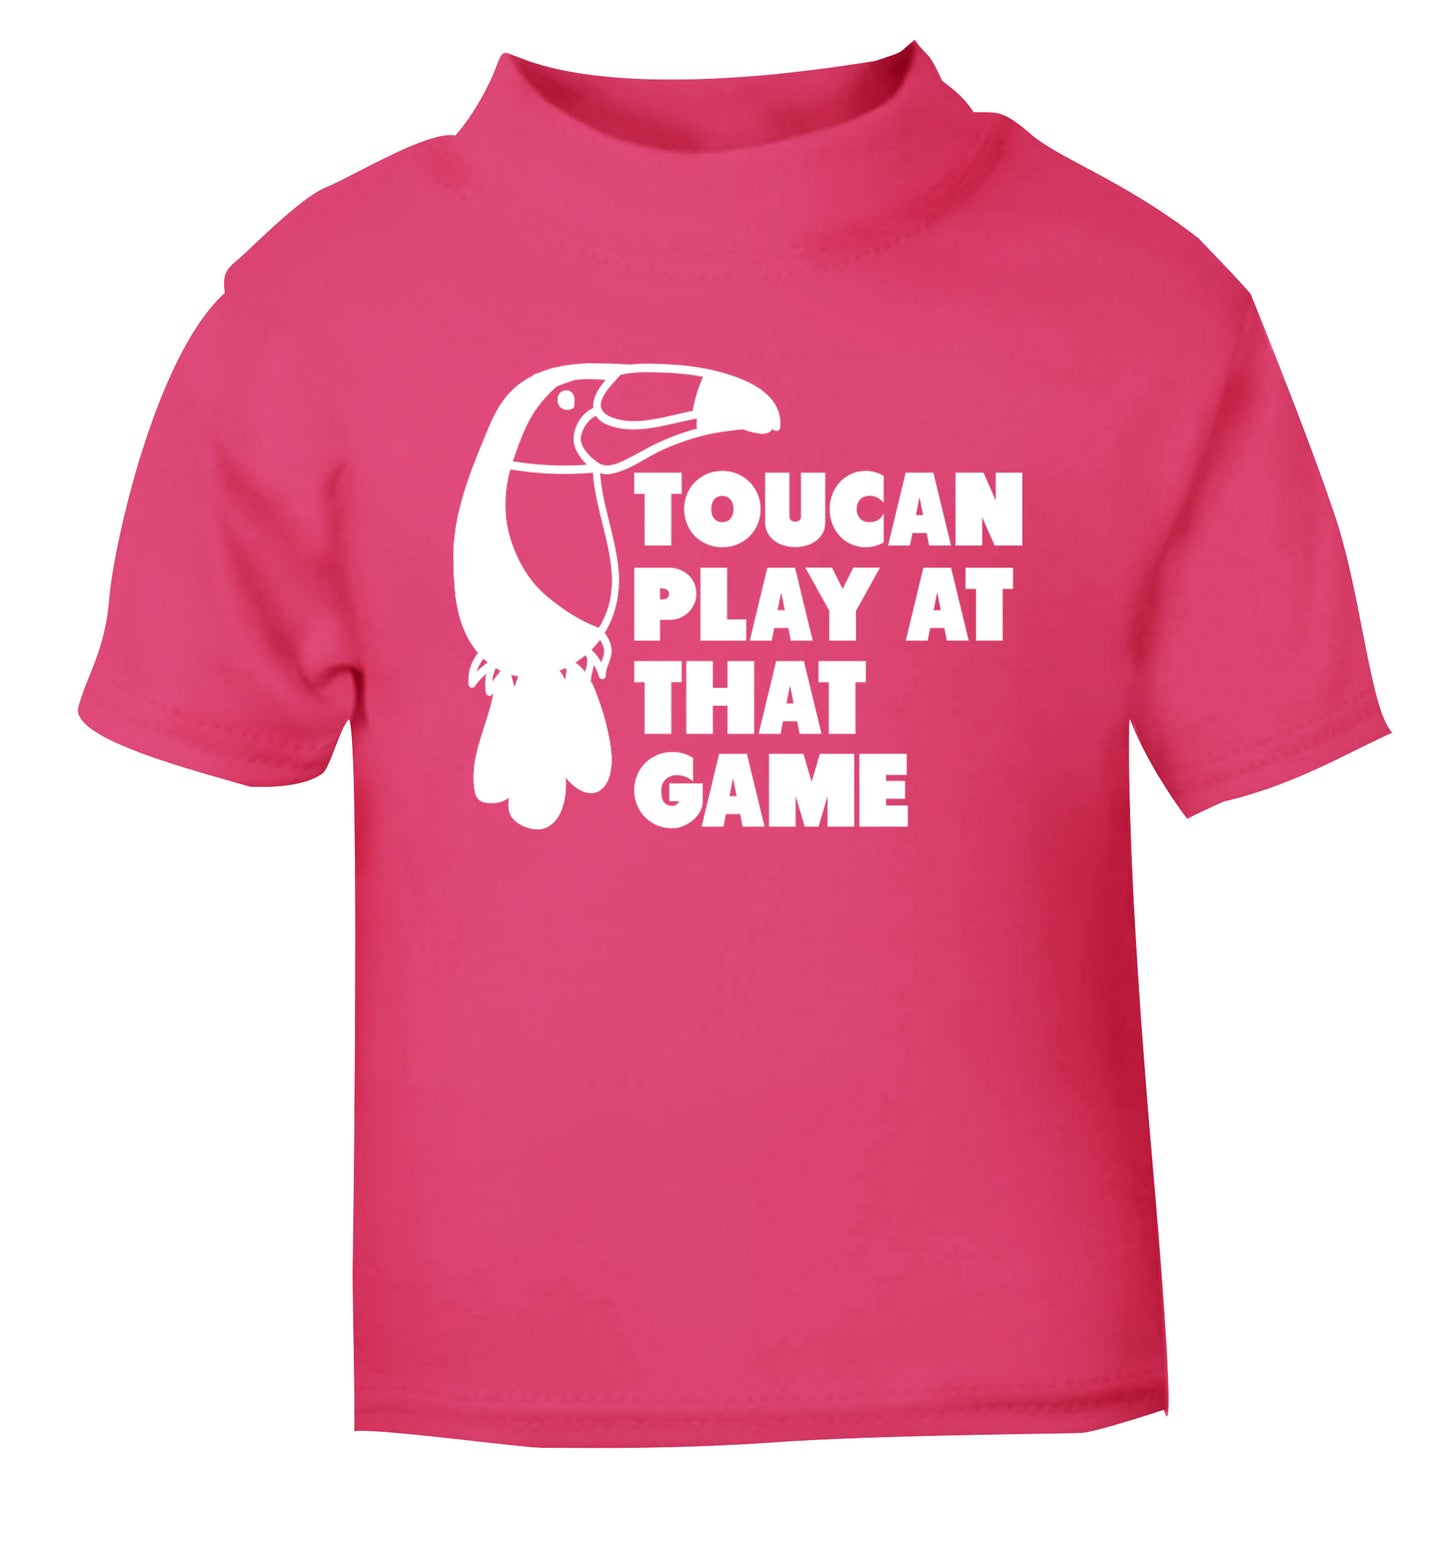 Toucan play at that game pink Baby Toddler Tshirt 2 Years